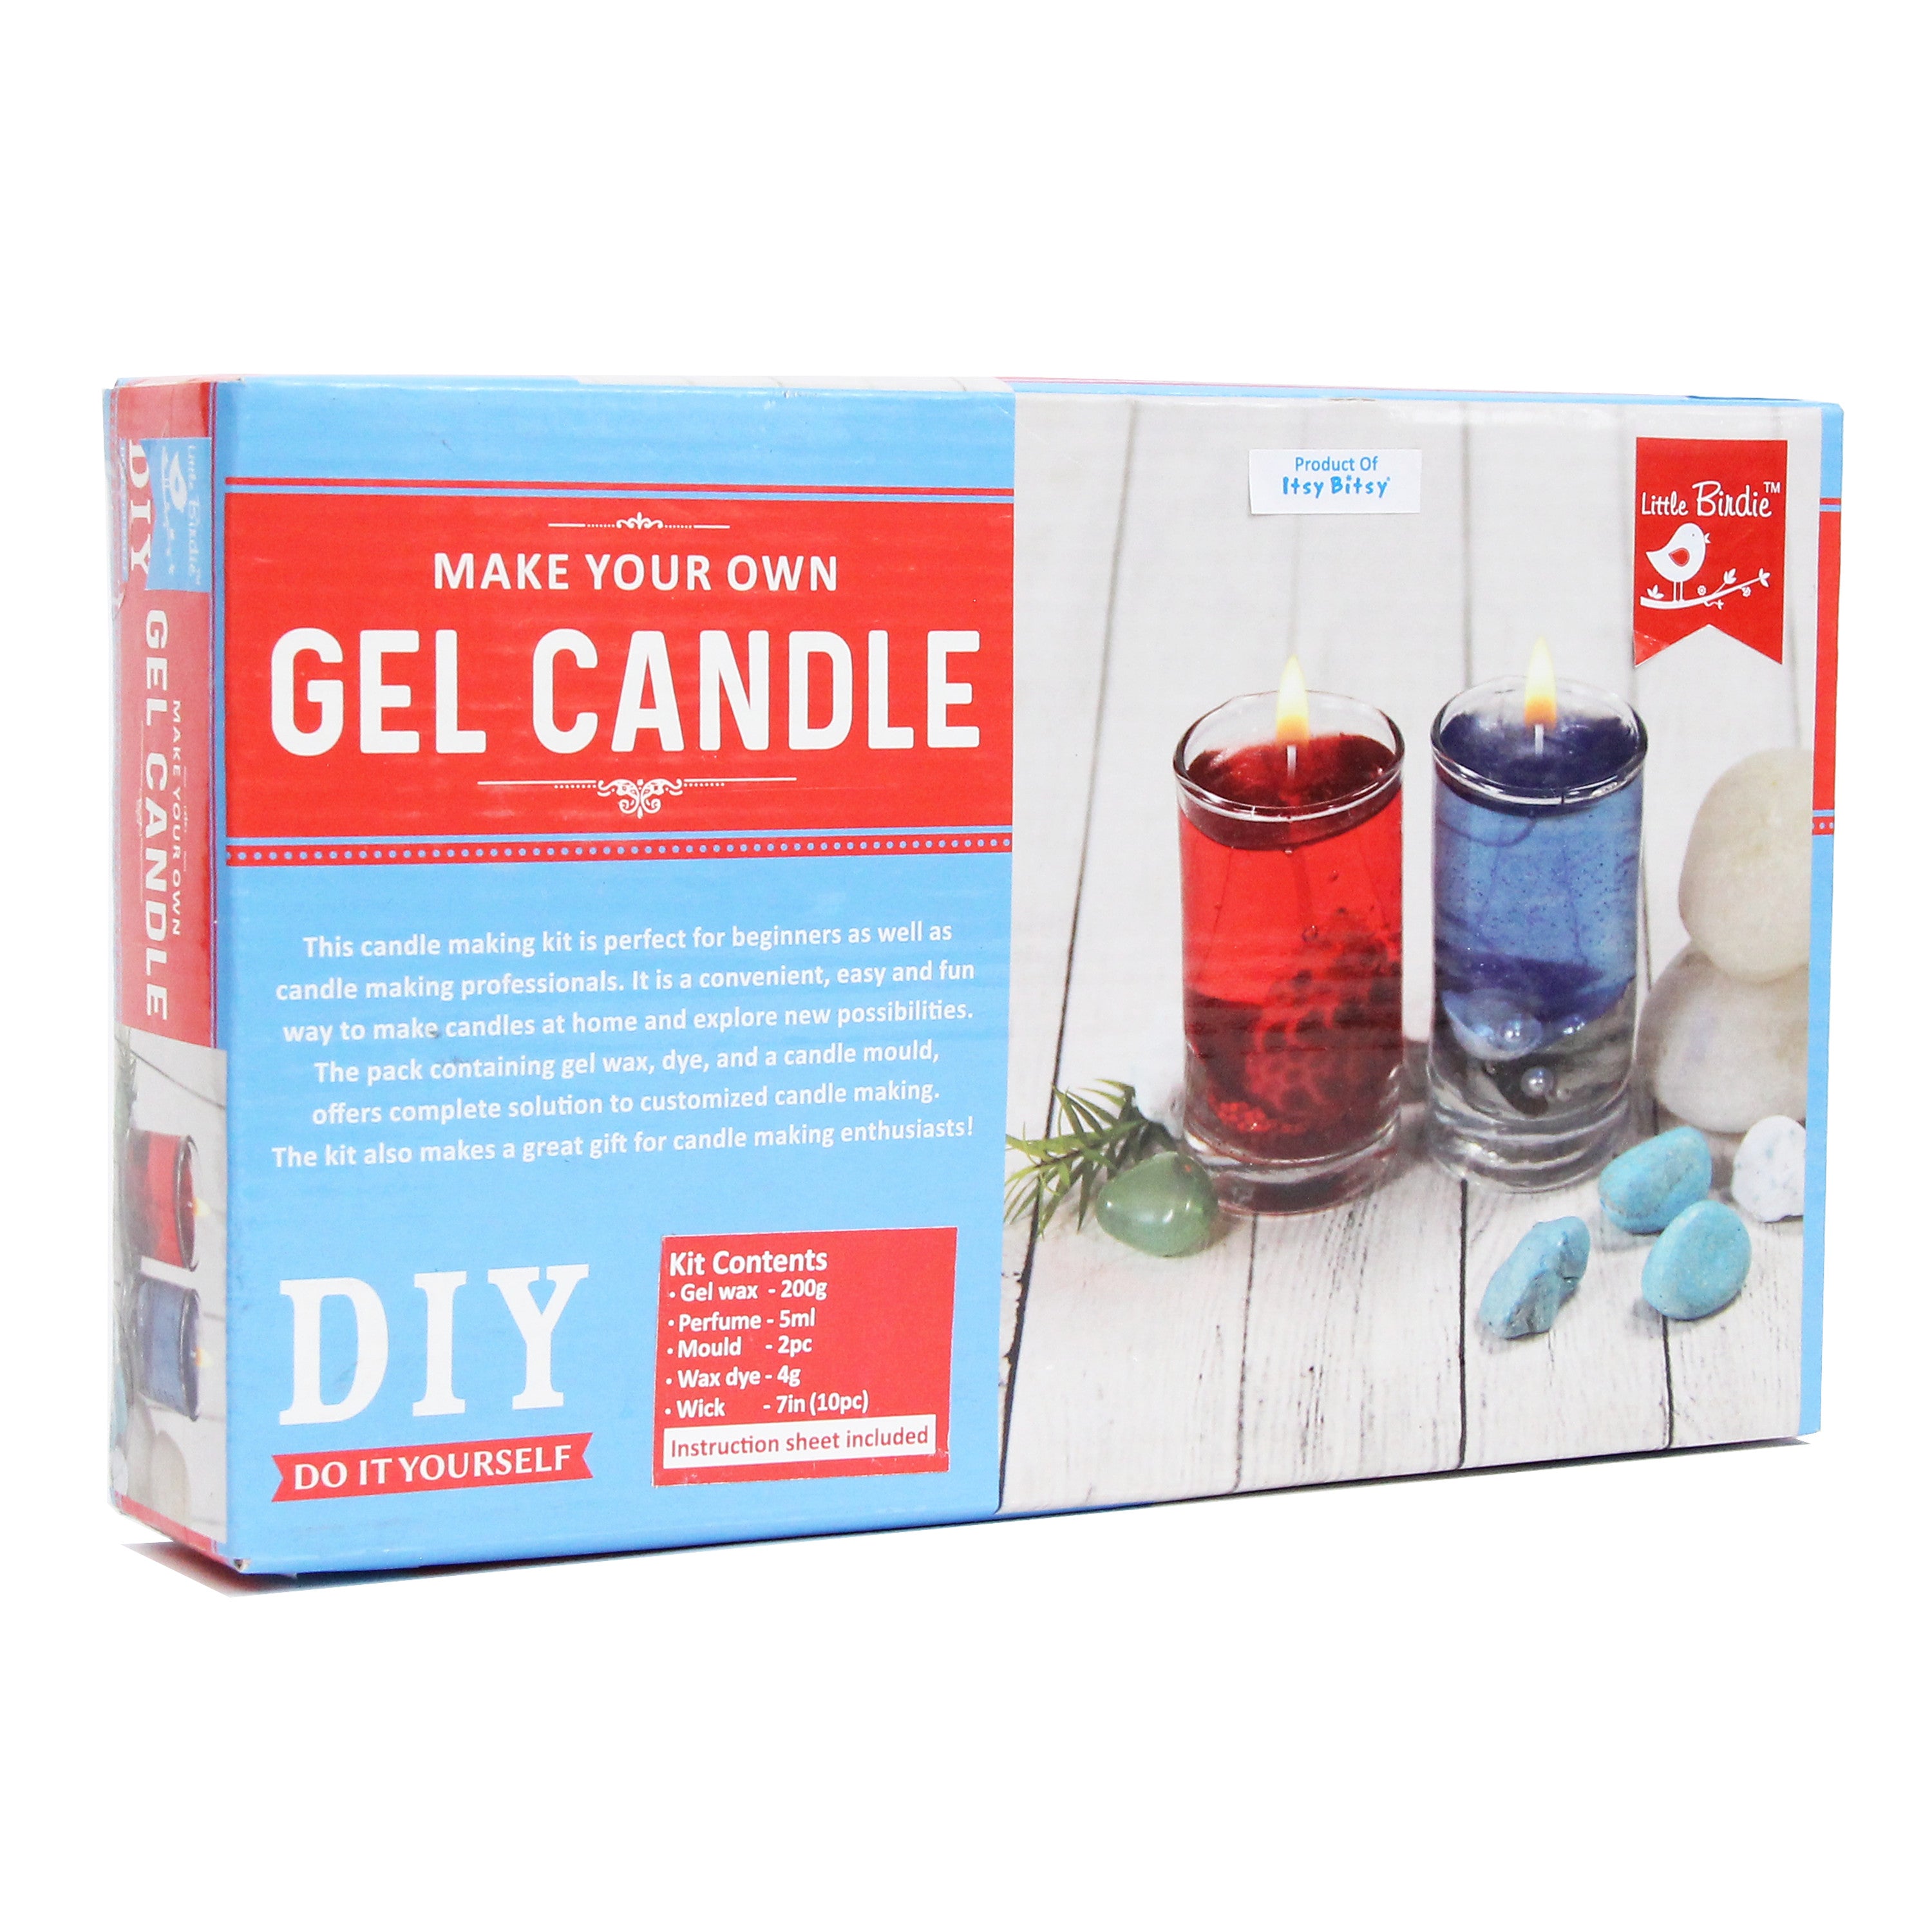 Make Your Own Gel Candle Kit Lb 1 Box